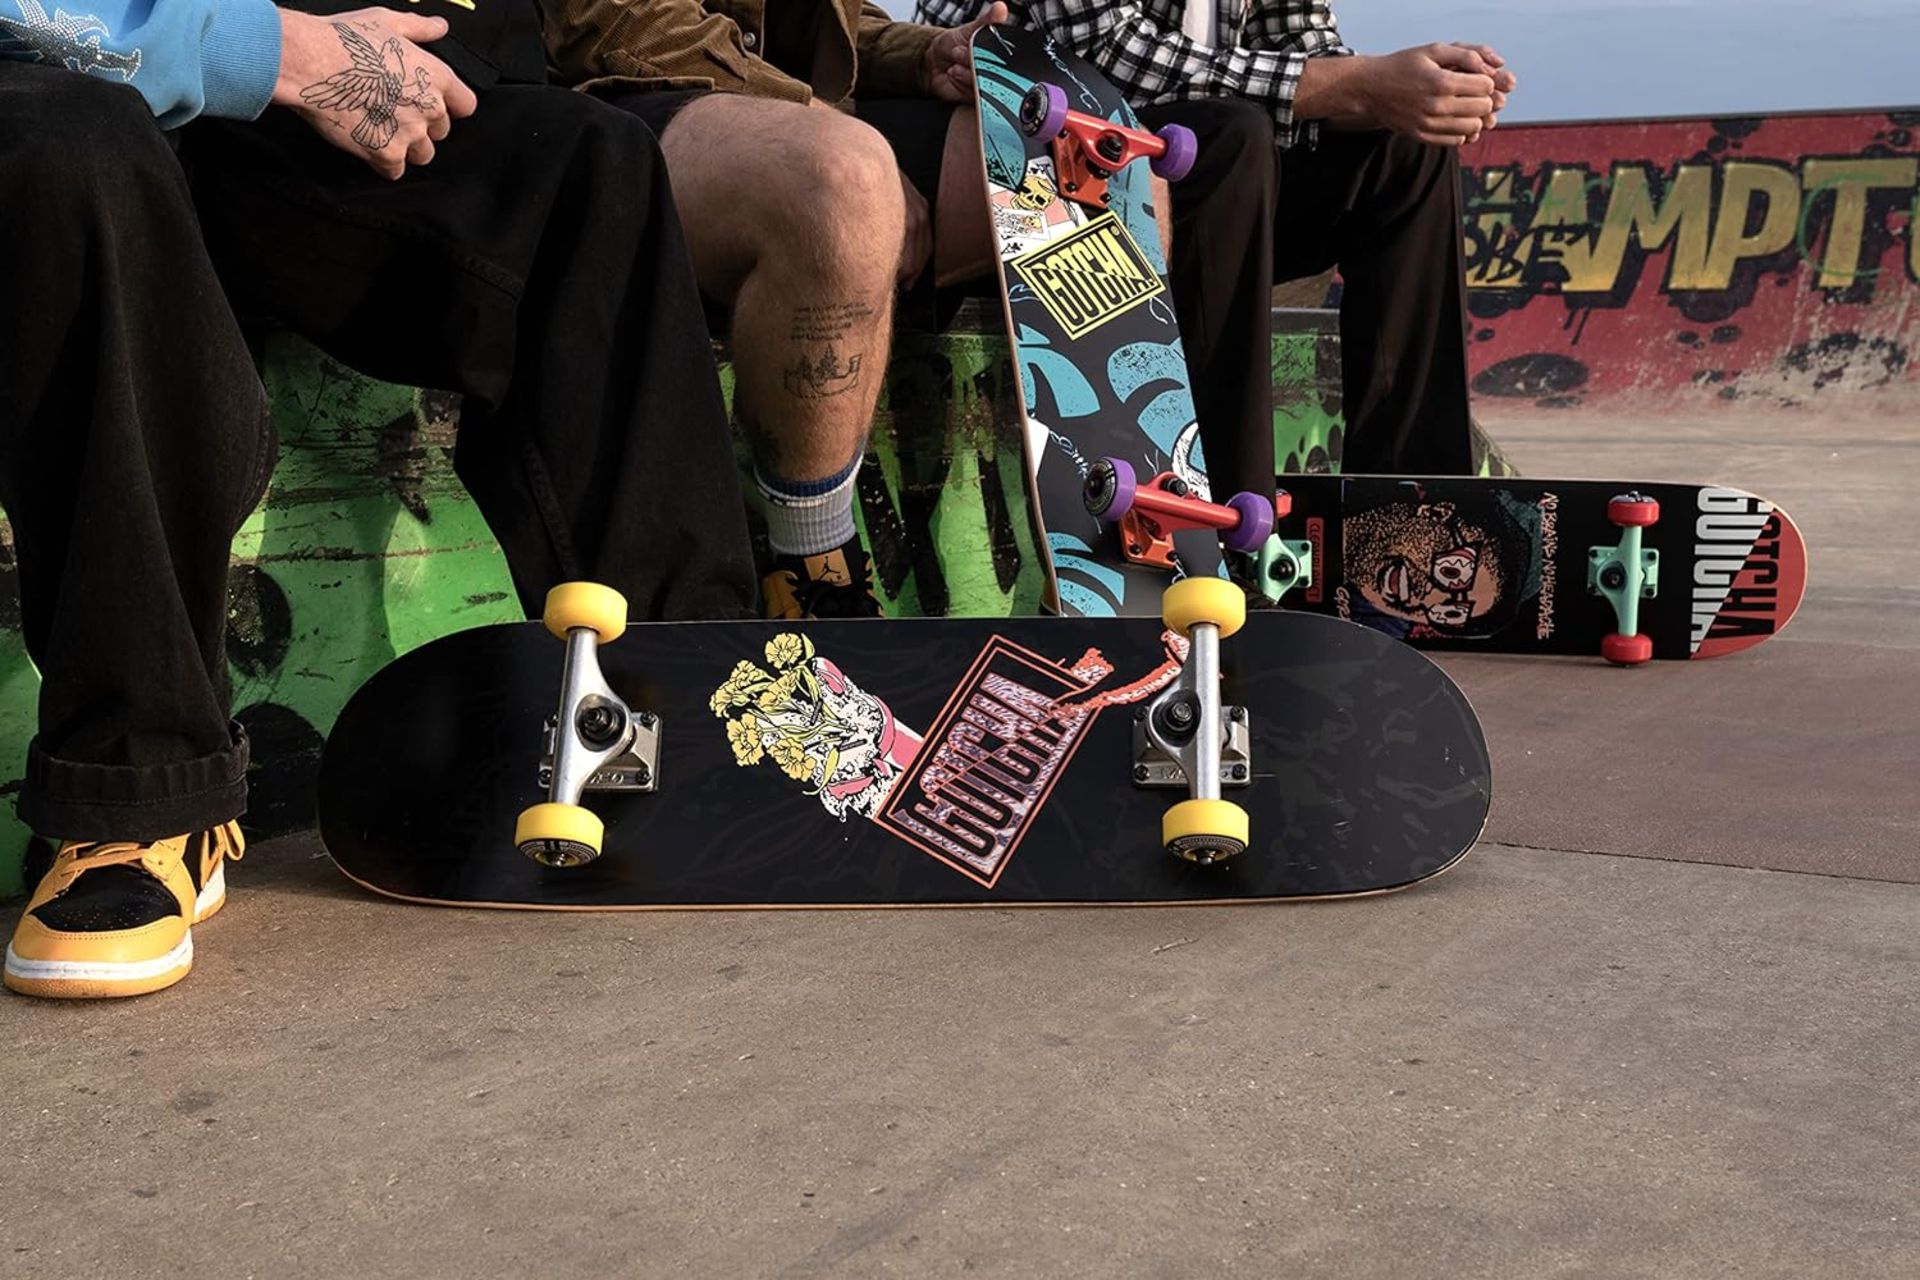 20 UNITS X NEW GOTCHA 31-INCH TO HELL POPSICLE SKATEBOARD ------------>>RRP £1700 - Image 3 of 5